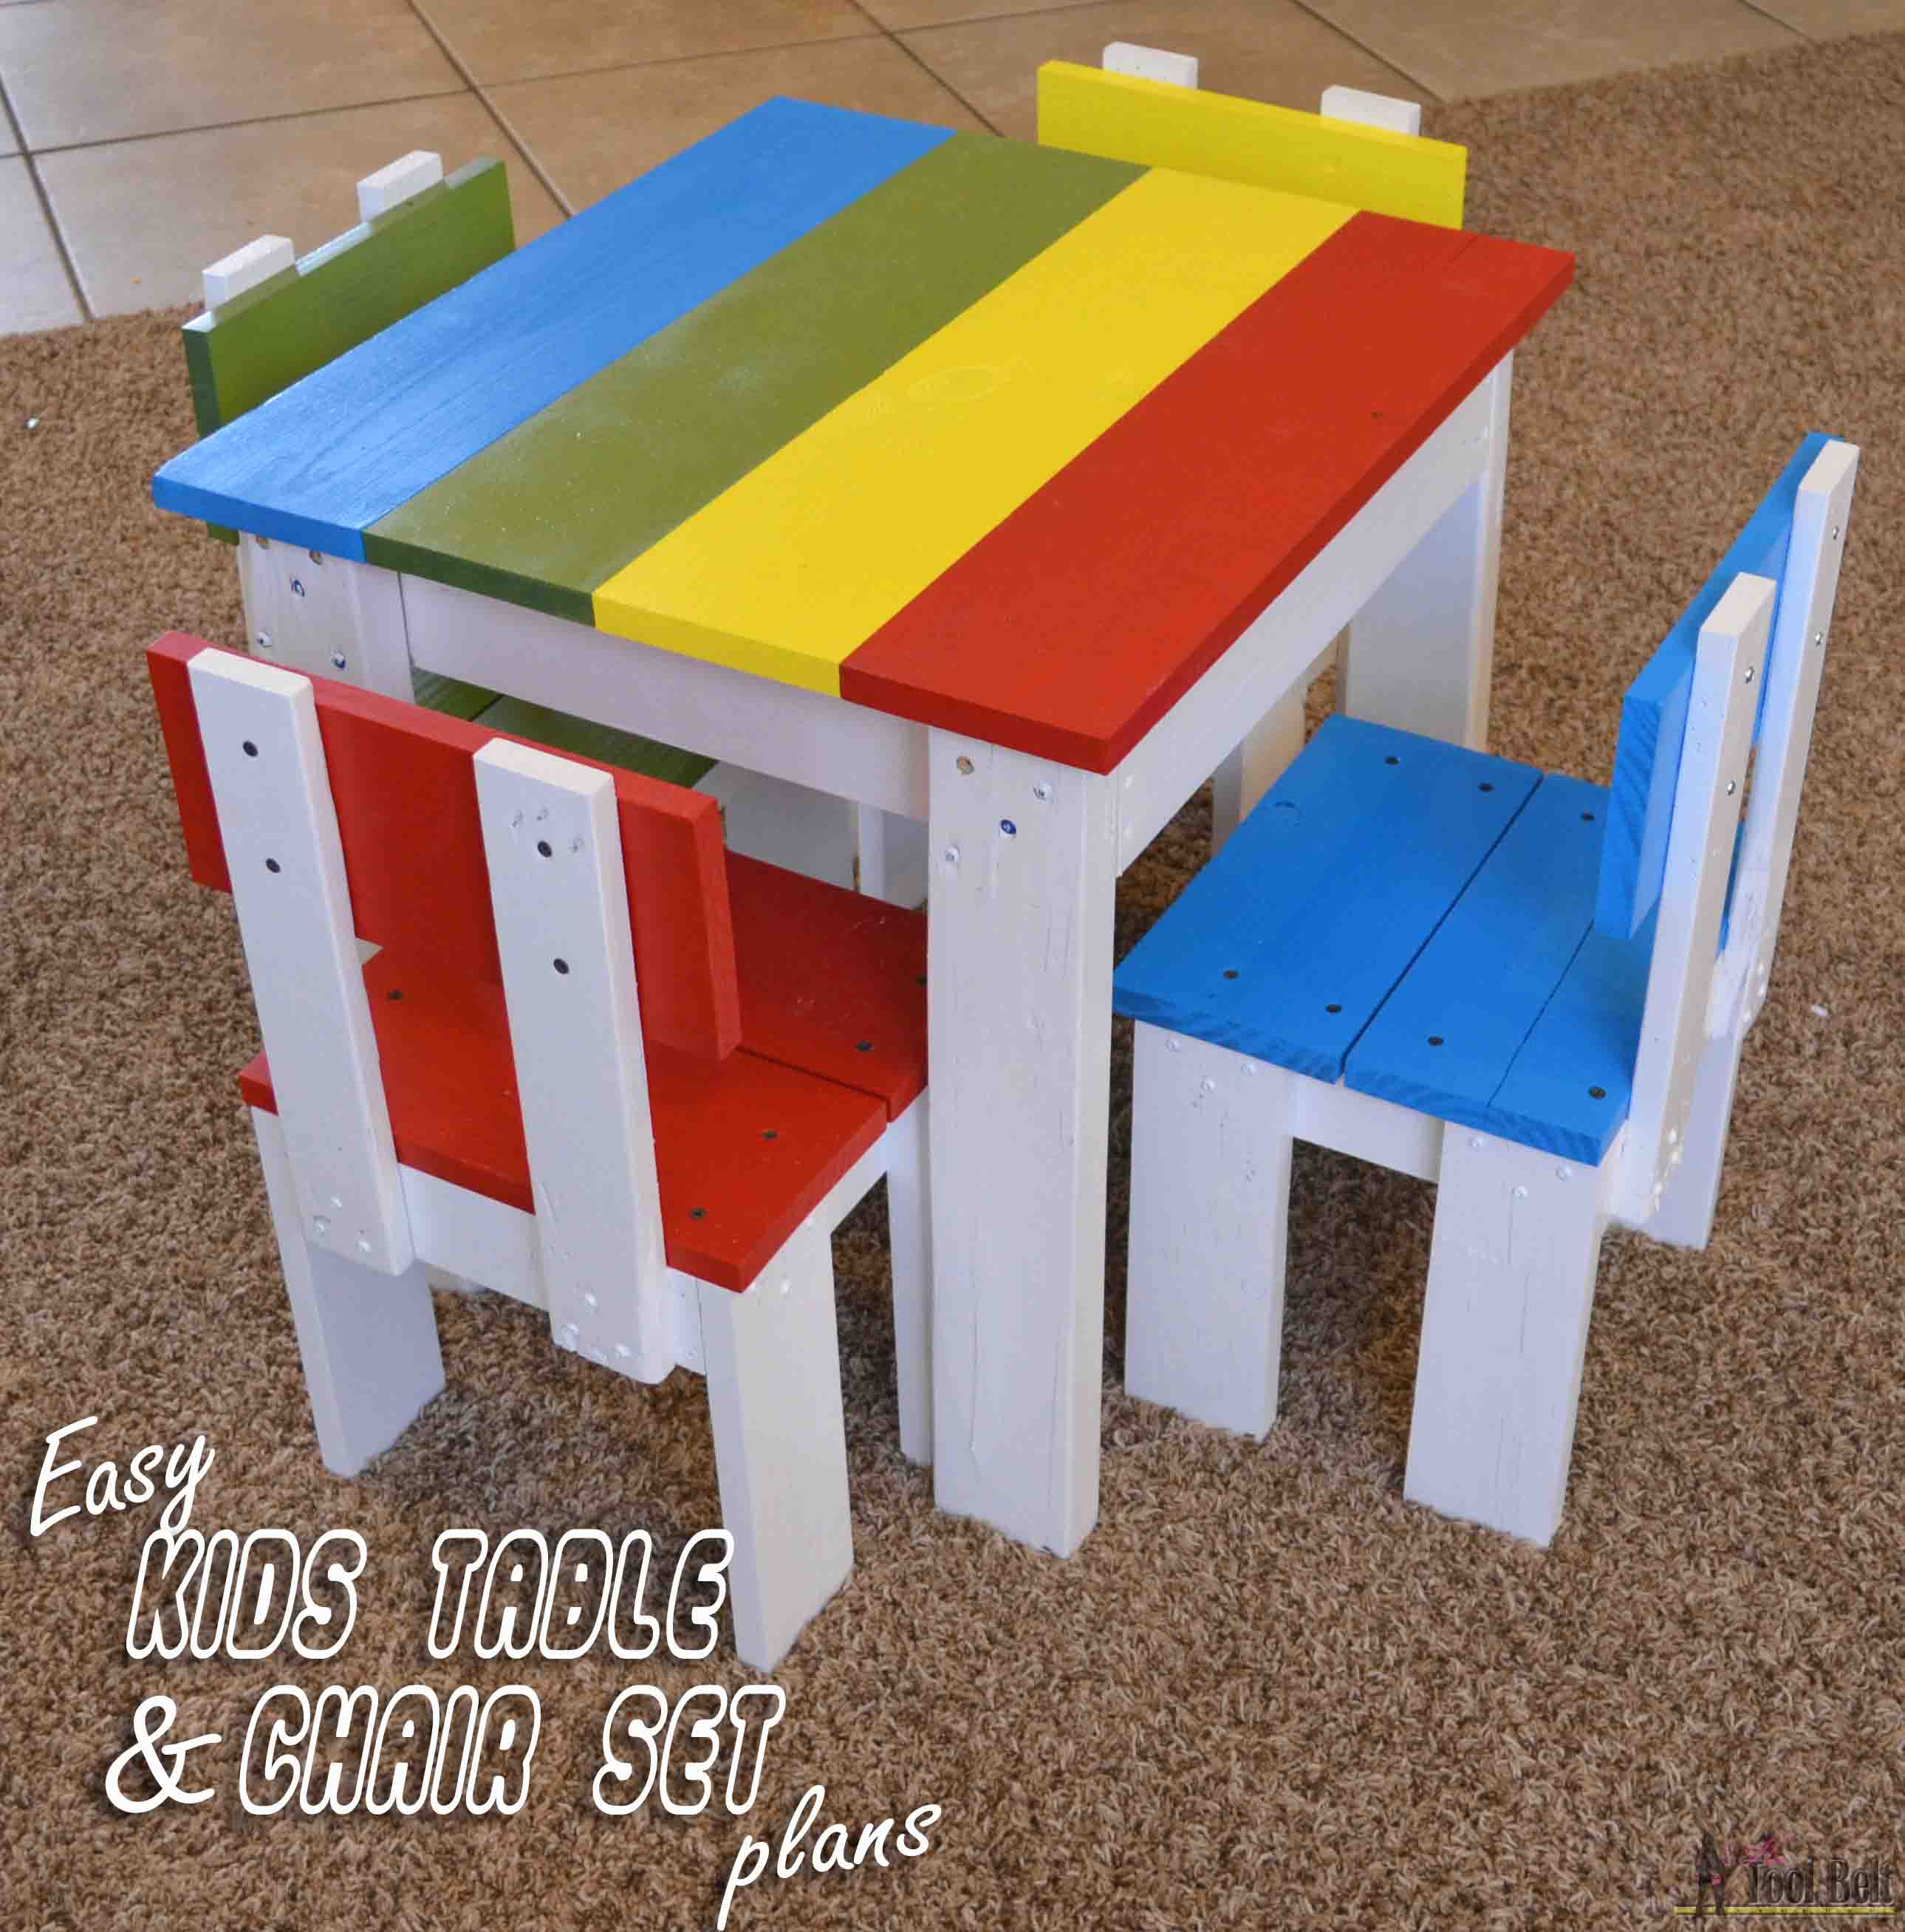 Build an easy table and chair set for the little kids. The set costs 